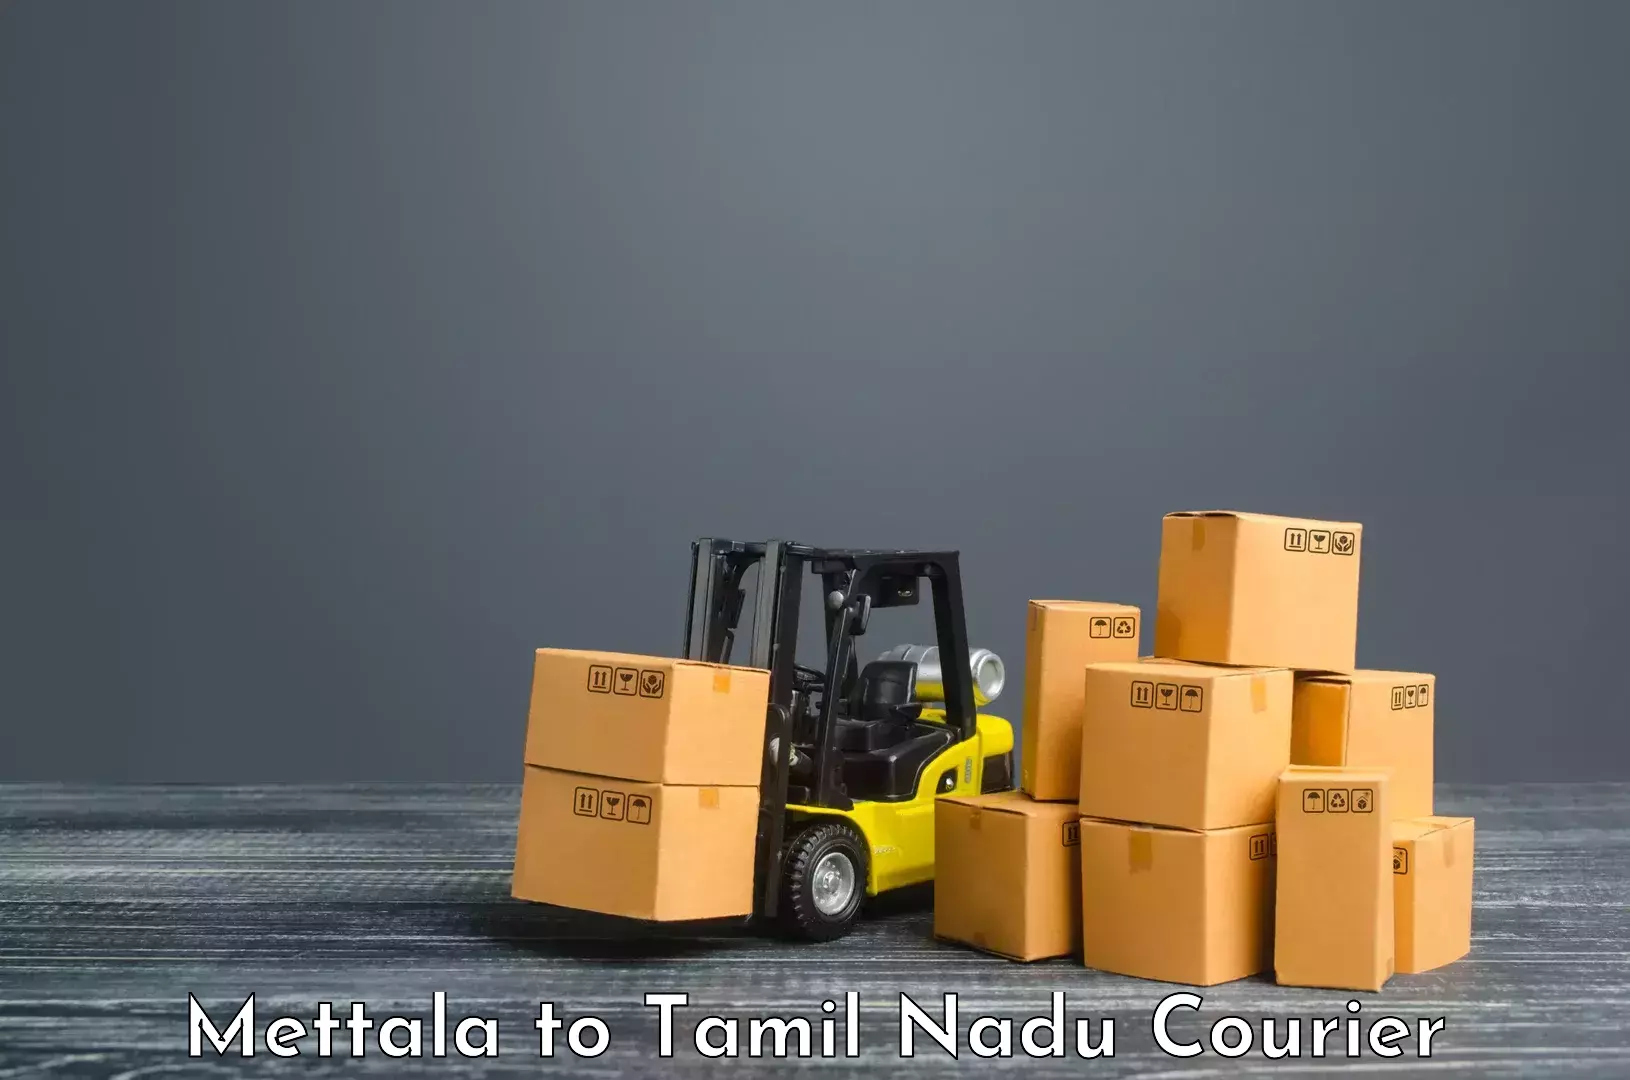 Advanced tracking systems in Mettala to Tamil Nadu